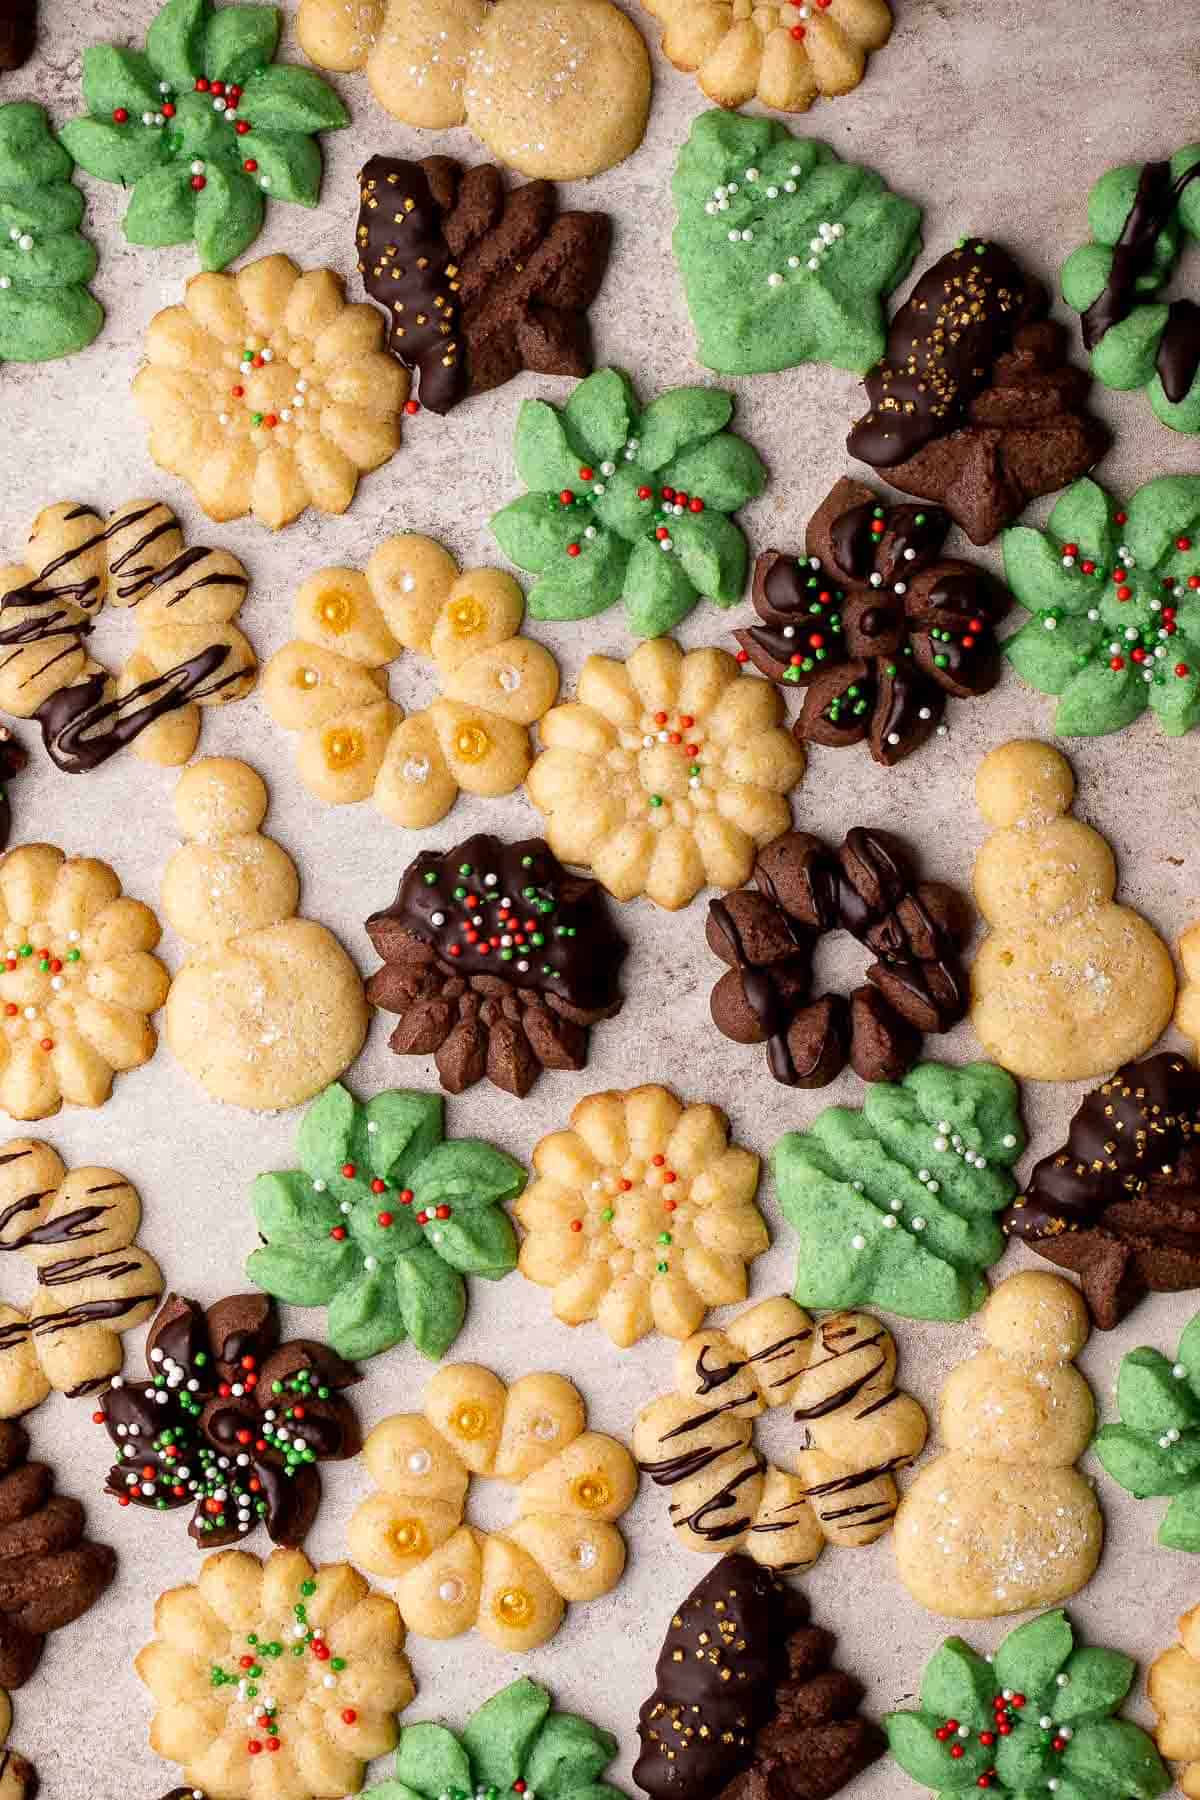 Buttery Spritz Cookies are impossibly light with a melt-in-your-mouth texture, making them a beloved holiday tradition for a reason. | aheadofthyme.com